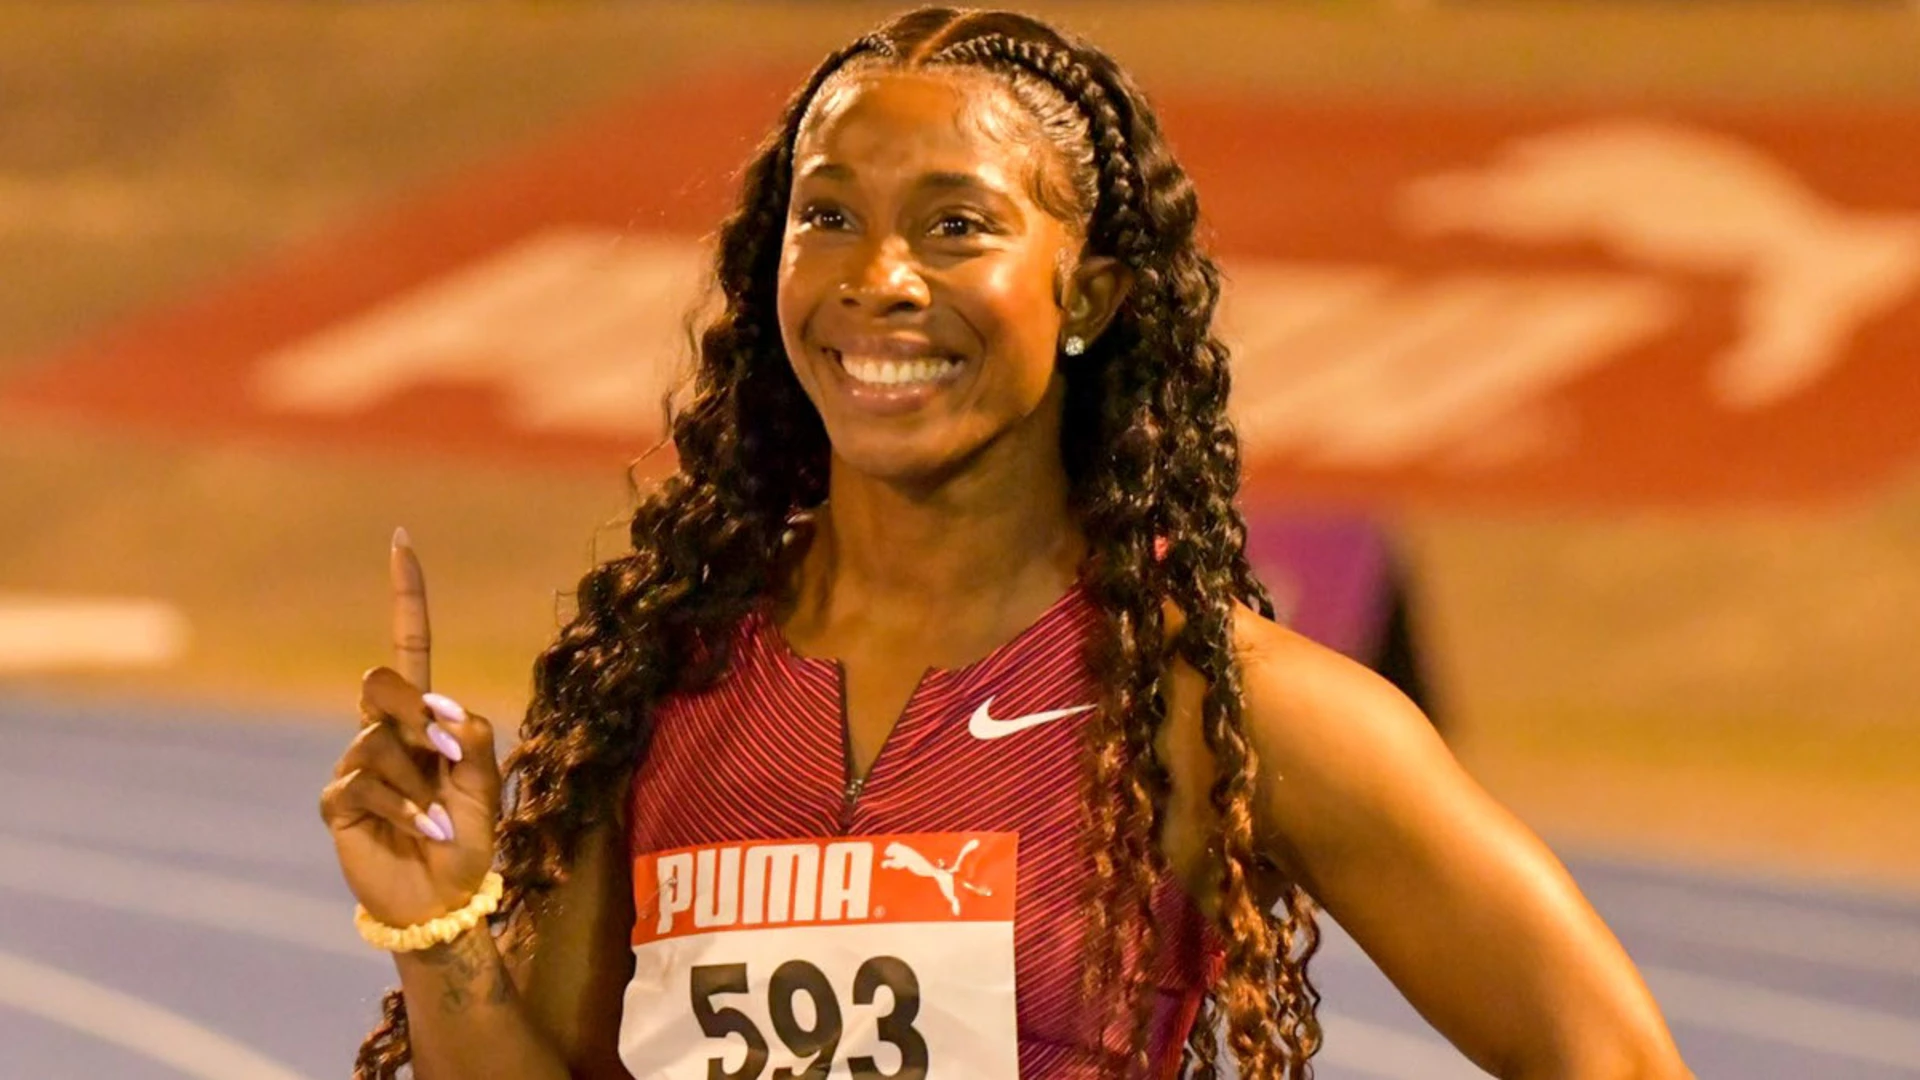 Fraser-Pryce, Jackson strong in 100 at Jamaican Olympic trials